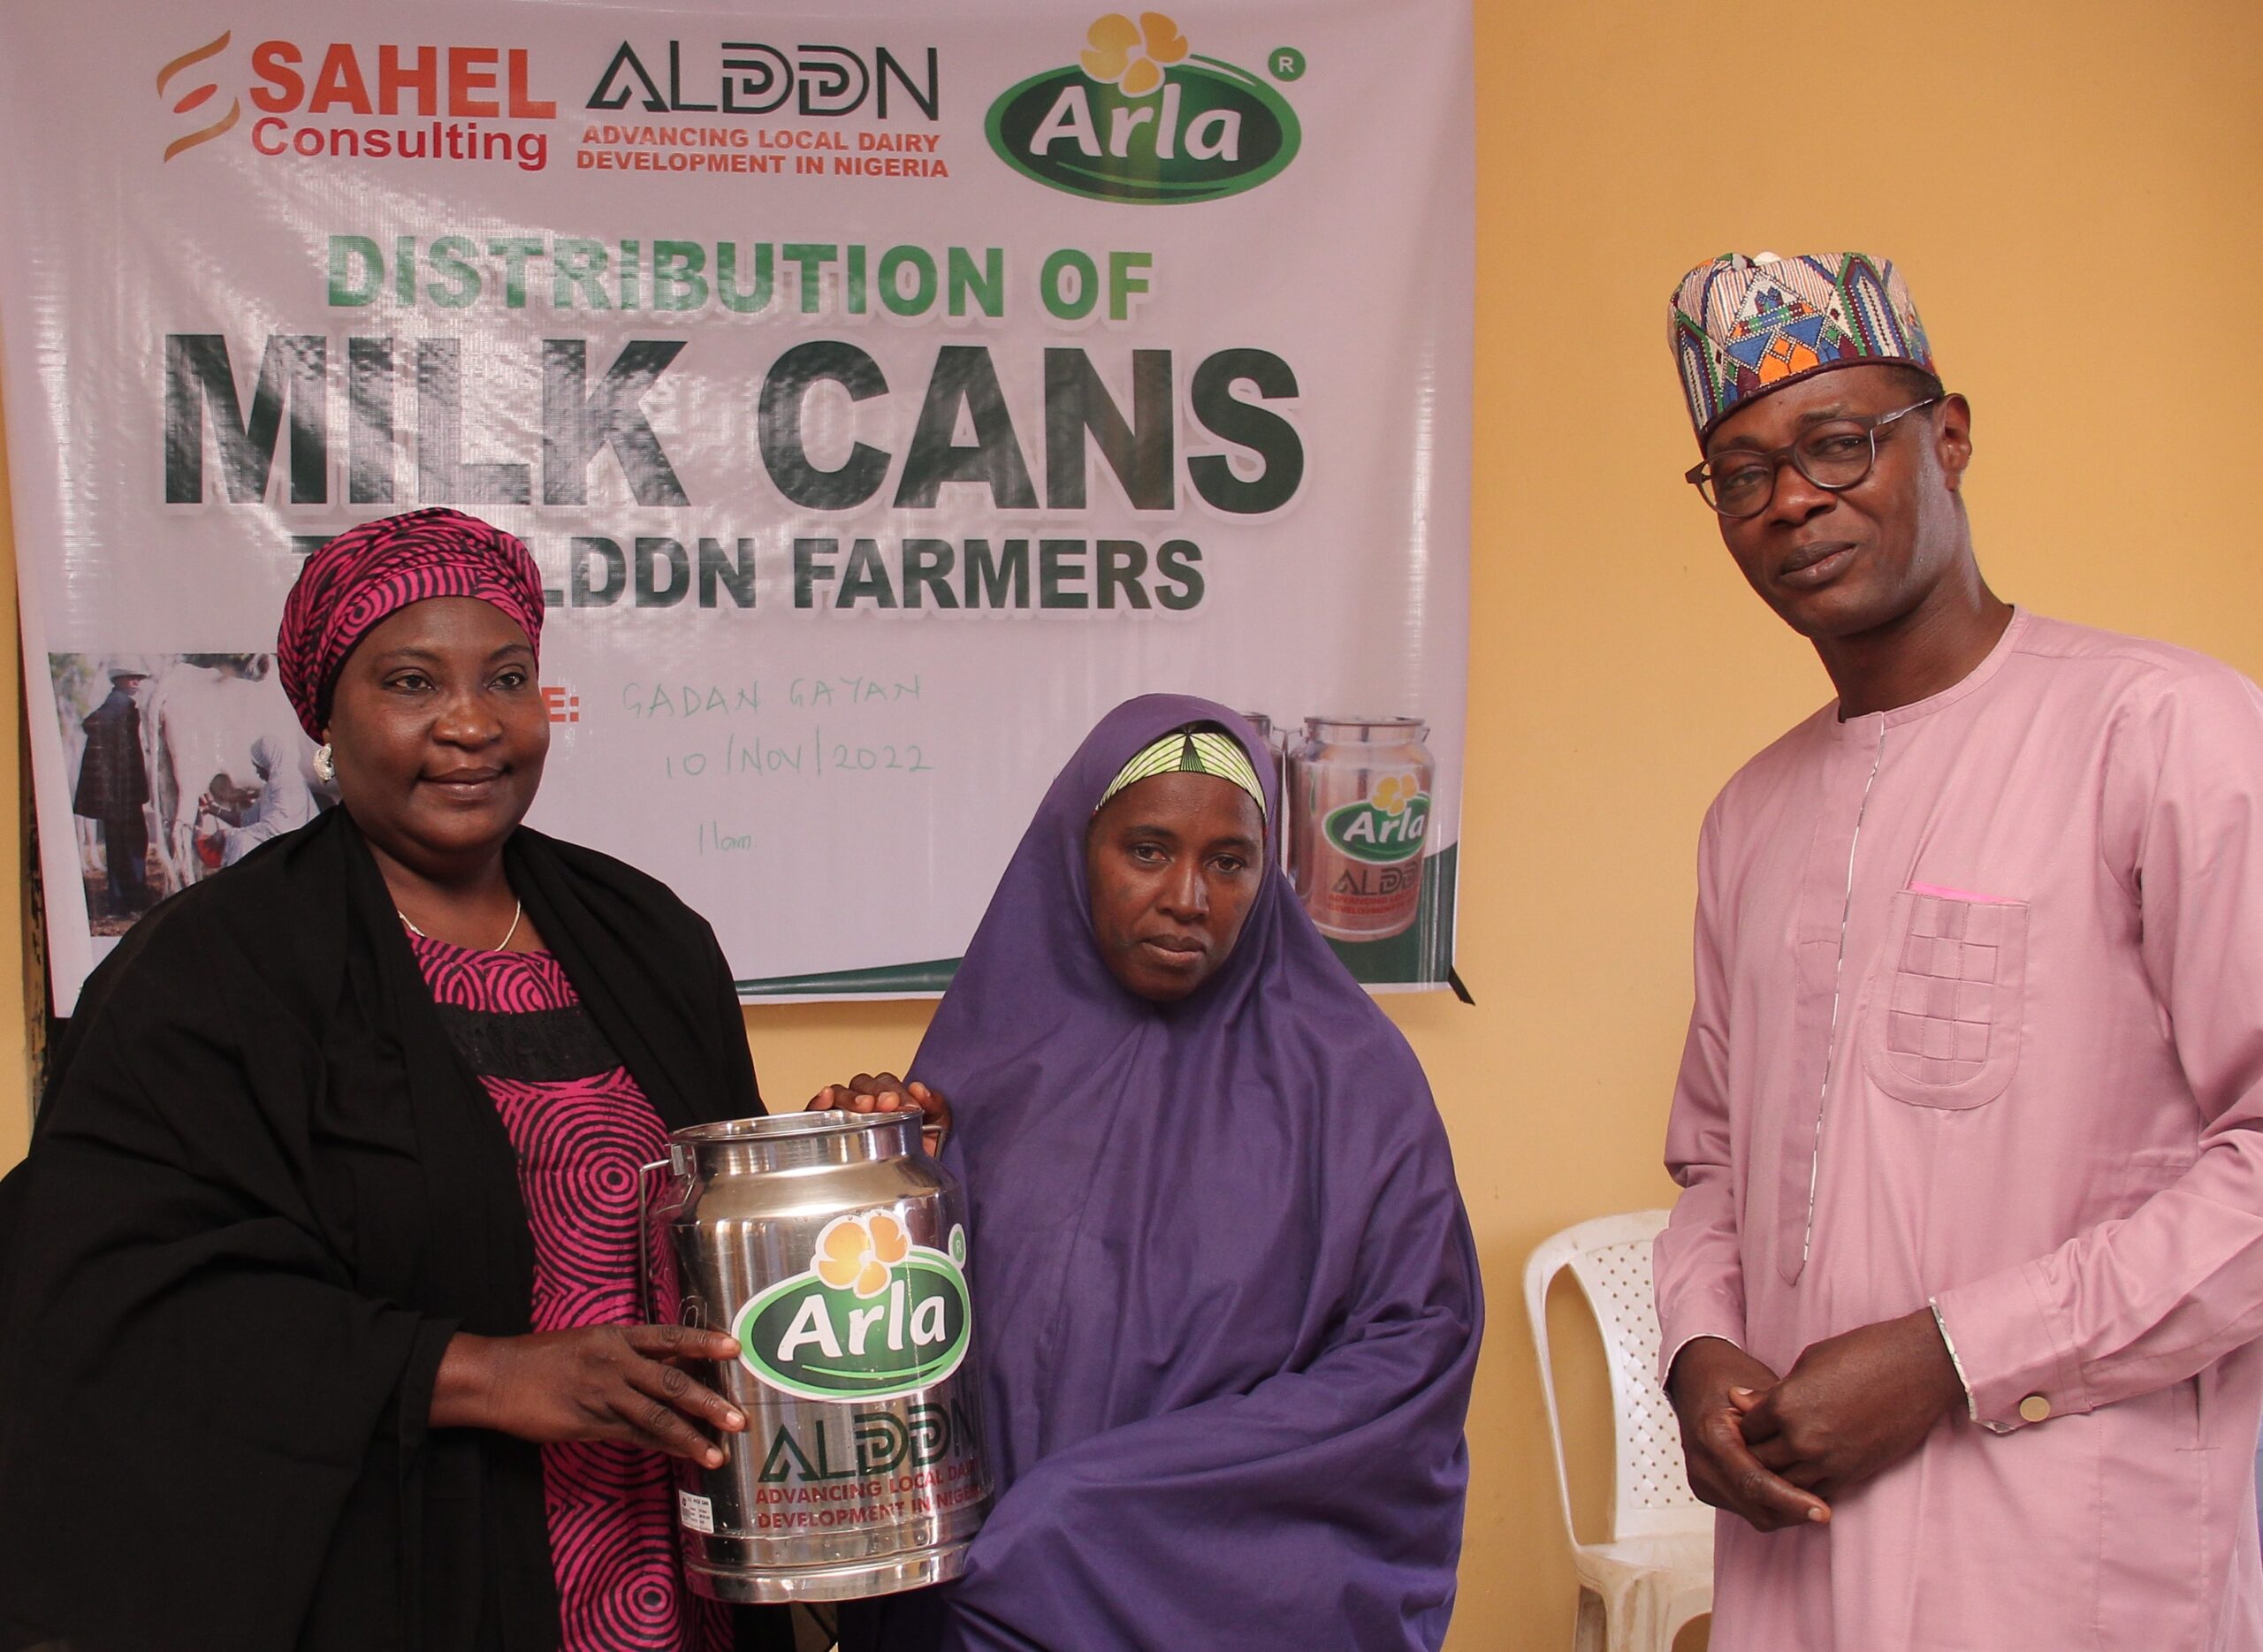 L-R: The Managing Director, Kaduna Federation of Milk Producers Cooperative Association (MILCOPAL), Hajia Rukaiyah Gwamna; participating farmer and program beneficiary, Hajia Amina Hashimu; and Arla Dairy Site Manager, Ewarts Samuel during the distribution of Milk Cans to local dairy farmers by Arla under the Advancing Local Dairy Development in Nigeria (ALDDN) program held in Kaduna recently.